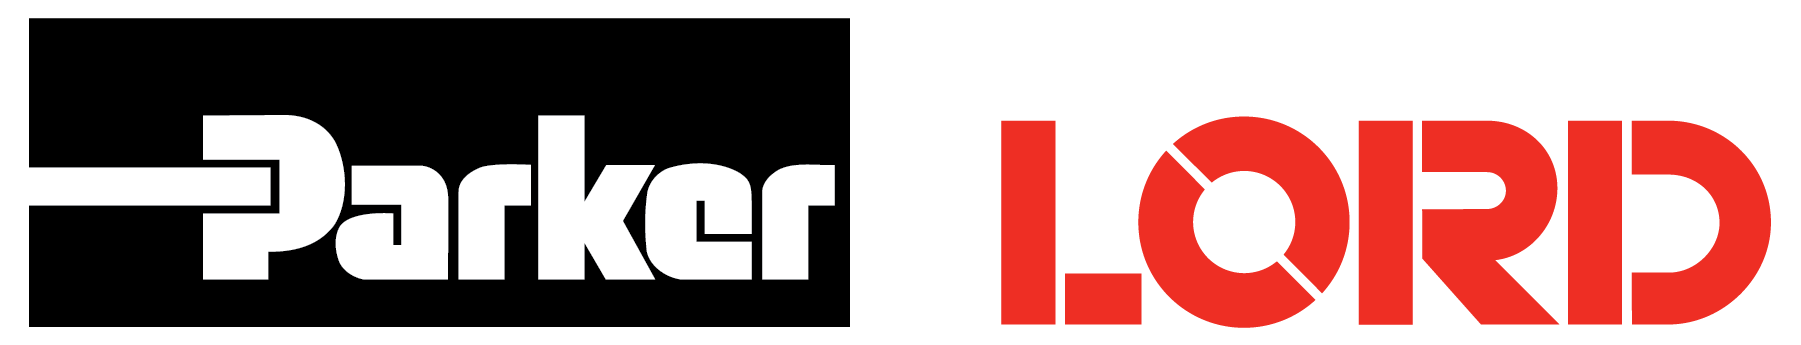 Parker LORD Logo